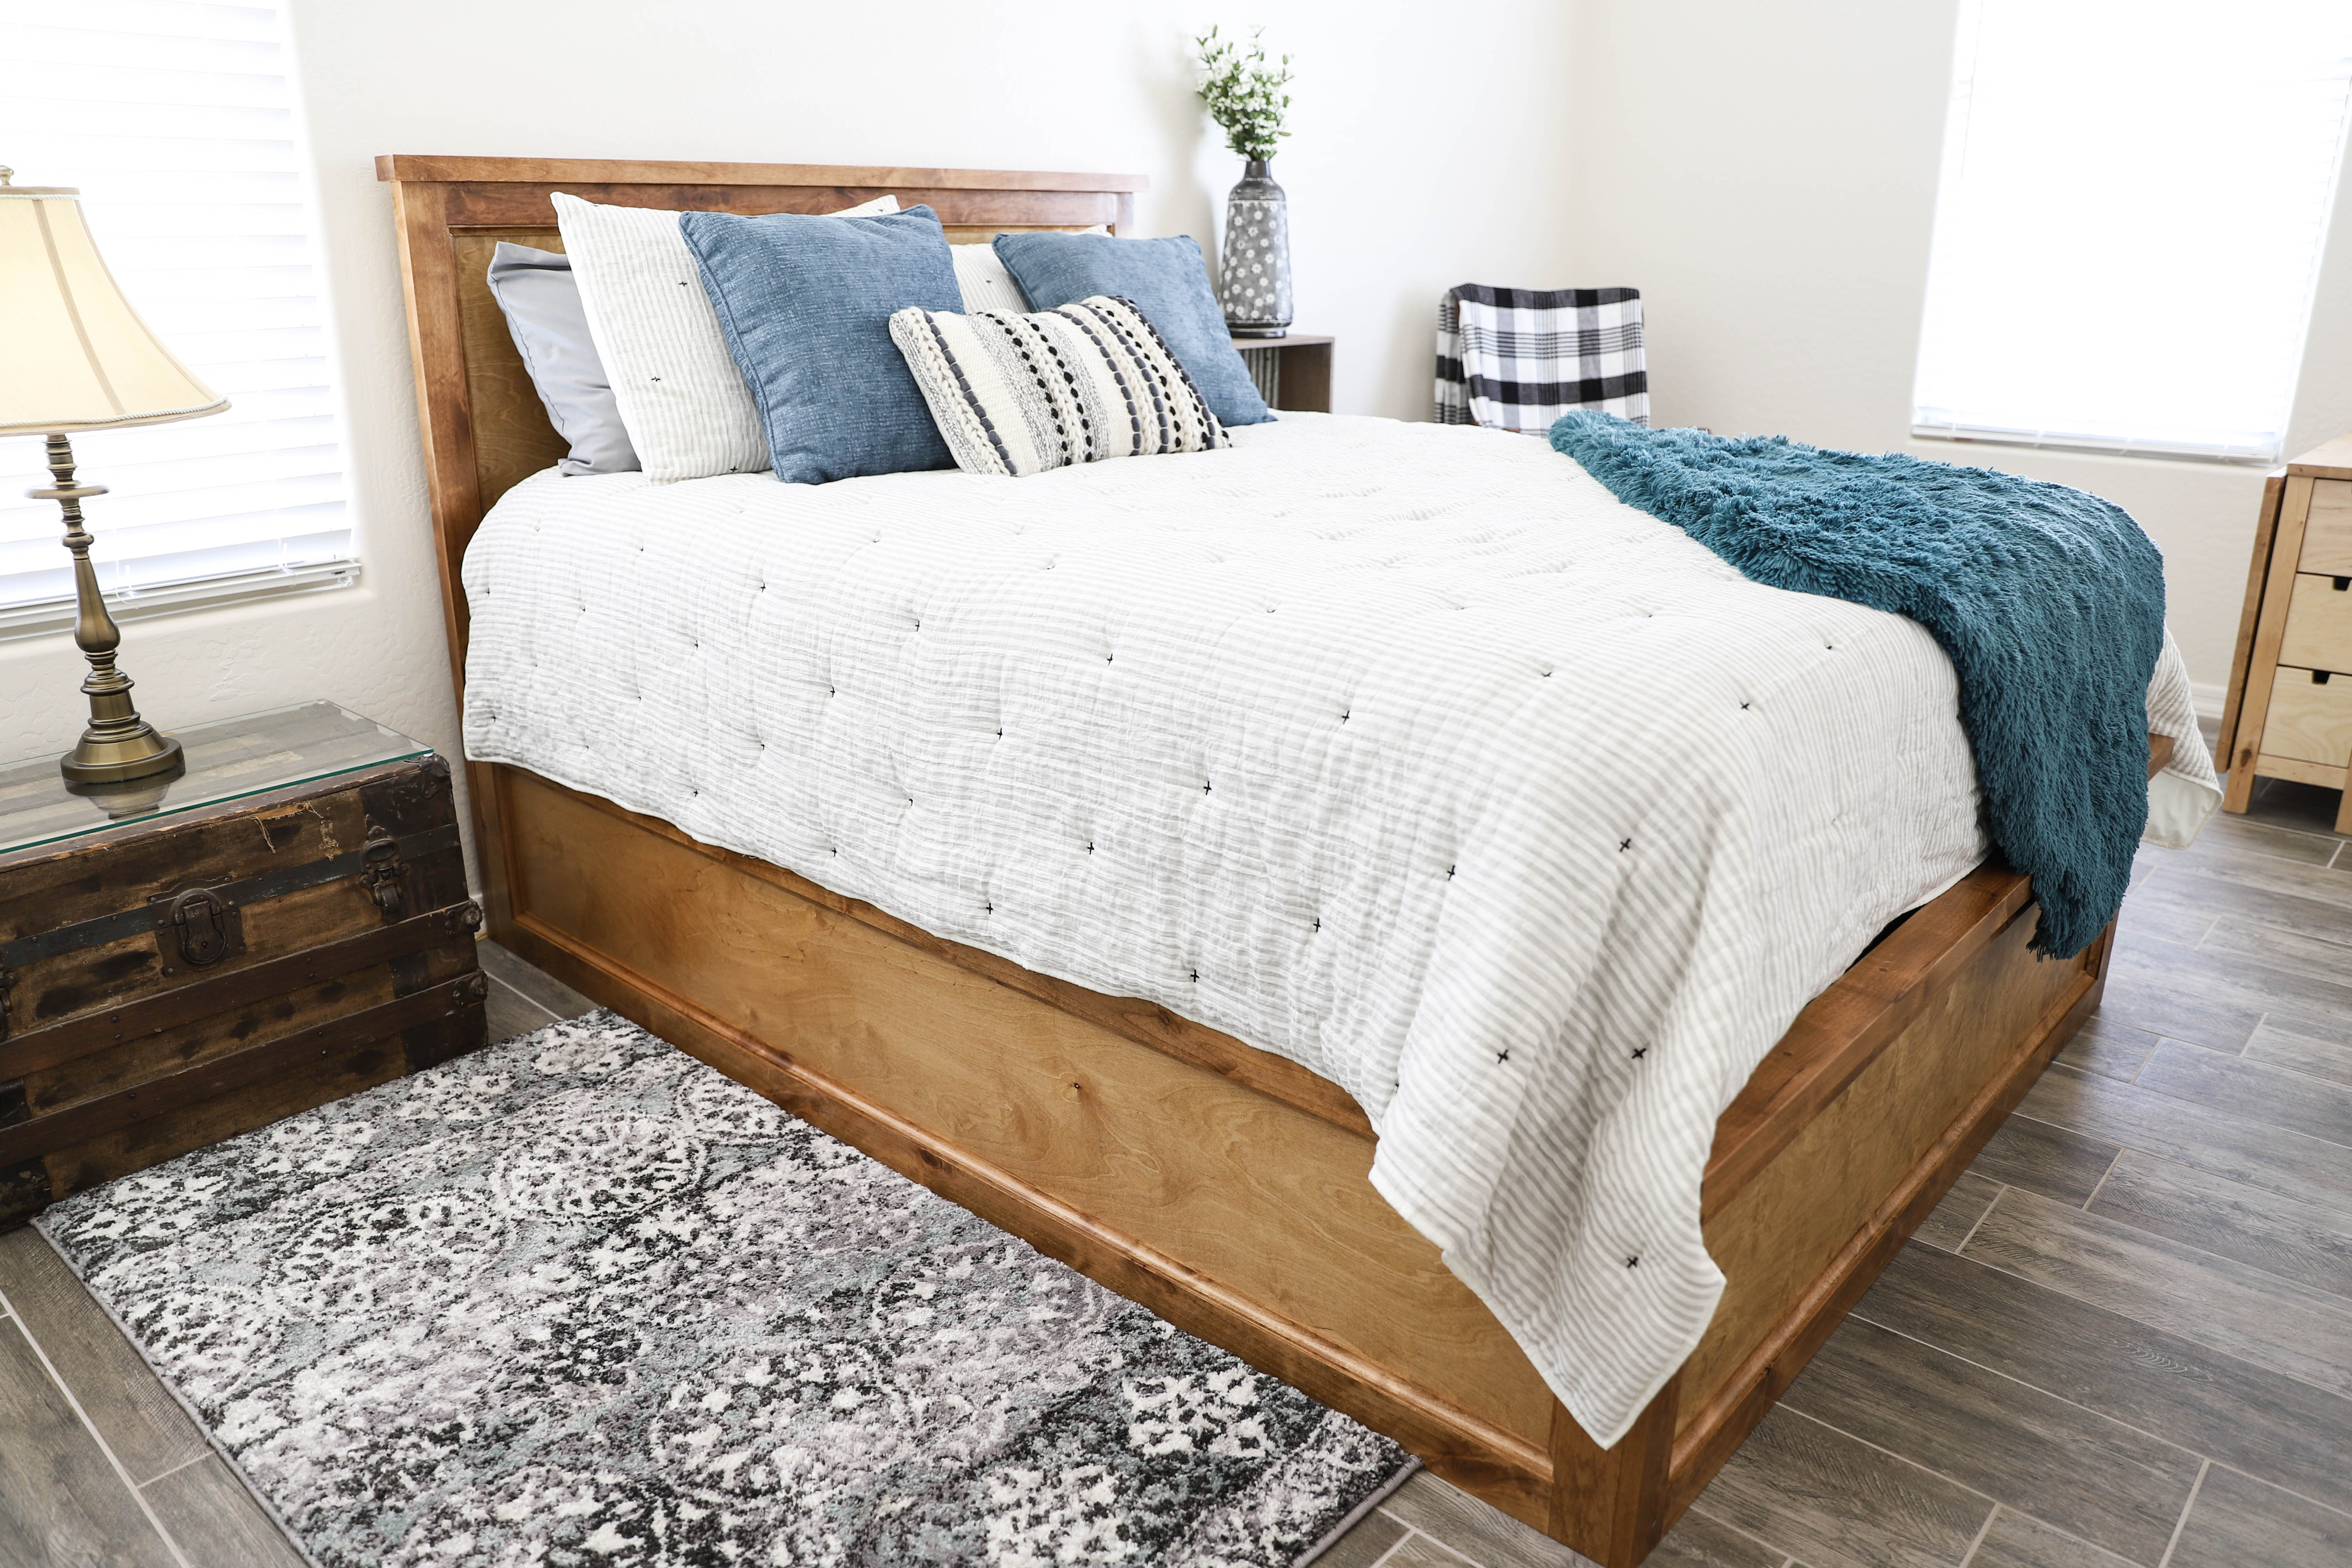 How To Build A Queen Size Storage Bed, Diy Rustic Queen Bed Frame With Storage Drawers